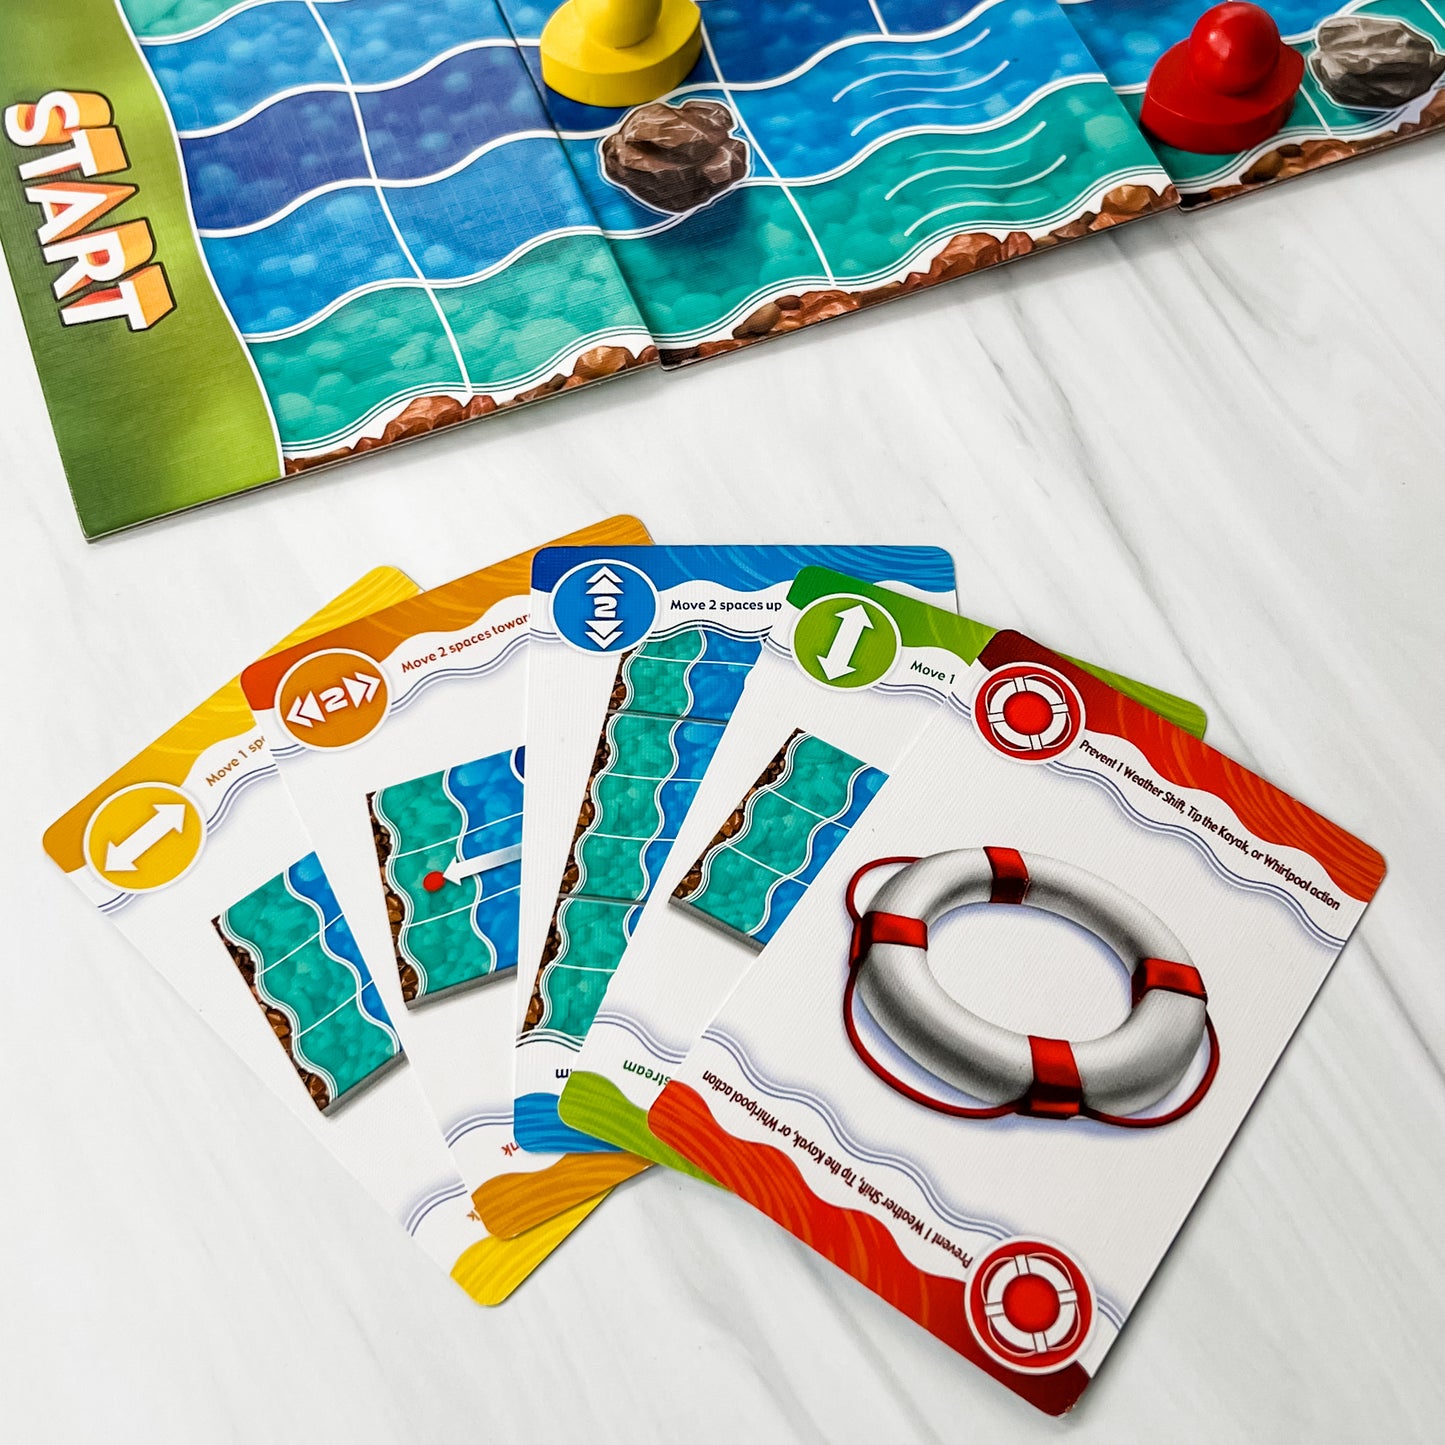 Kayak Chaos by SimplyFun is a planning and predicting game for ages 8 and up.